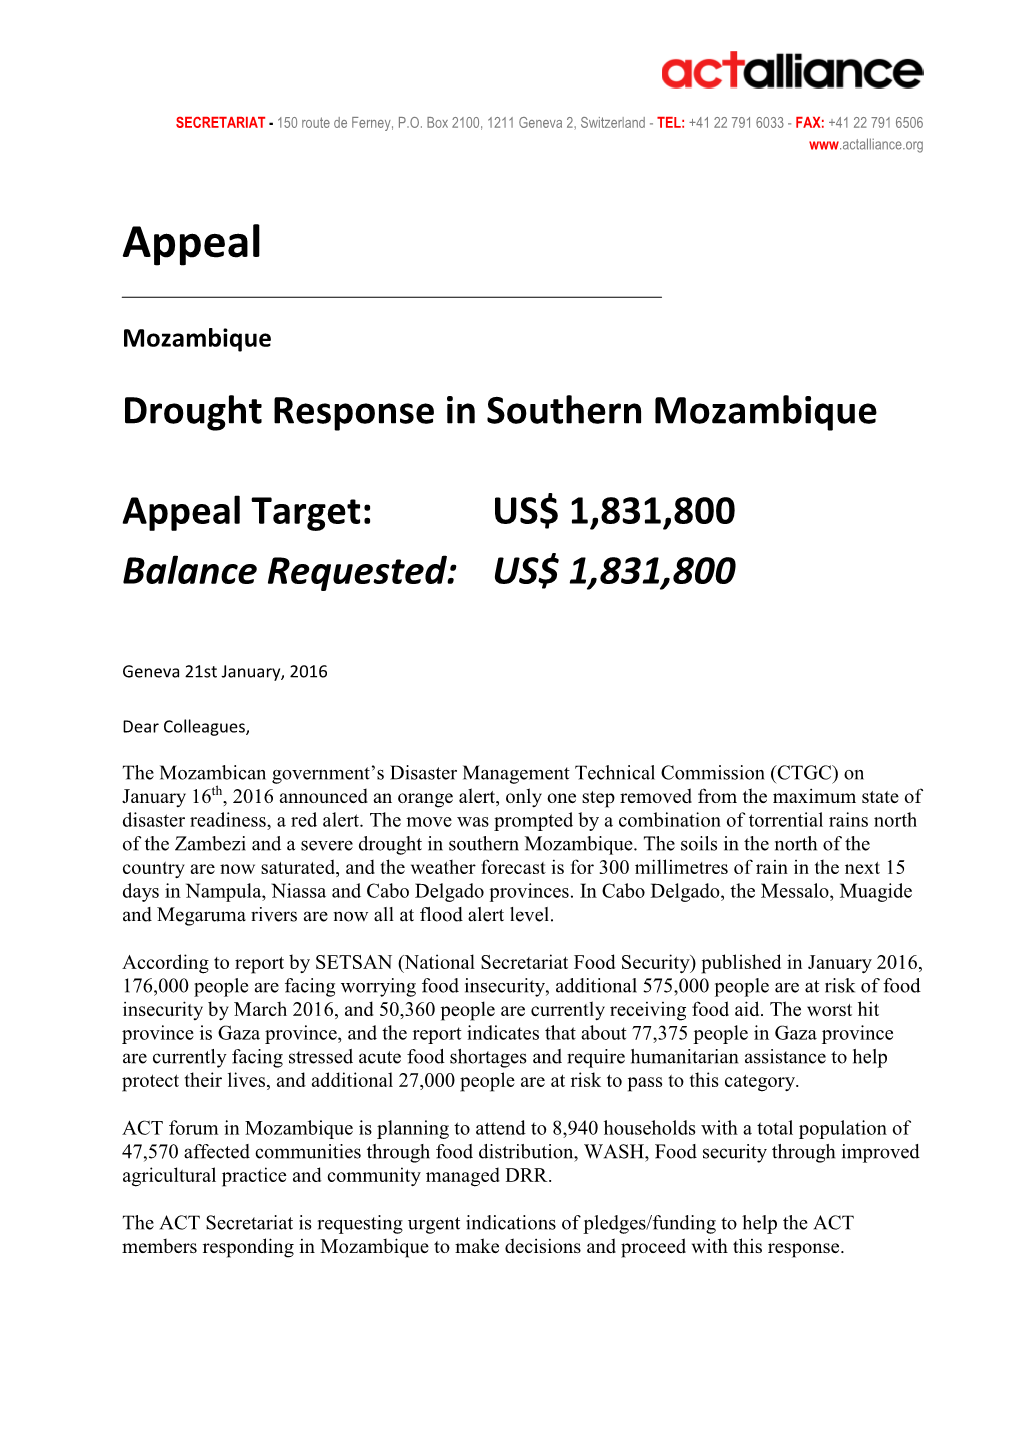 Drought Response in Mozambique Appeal 2016